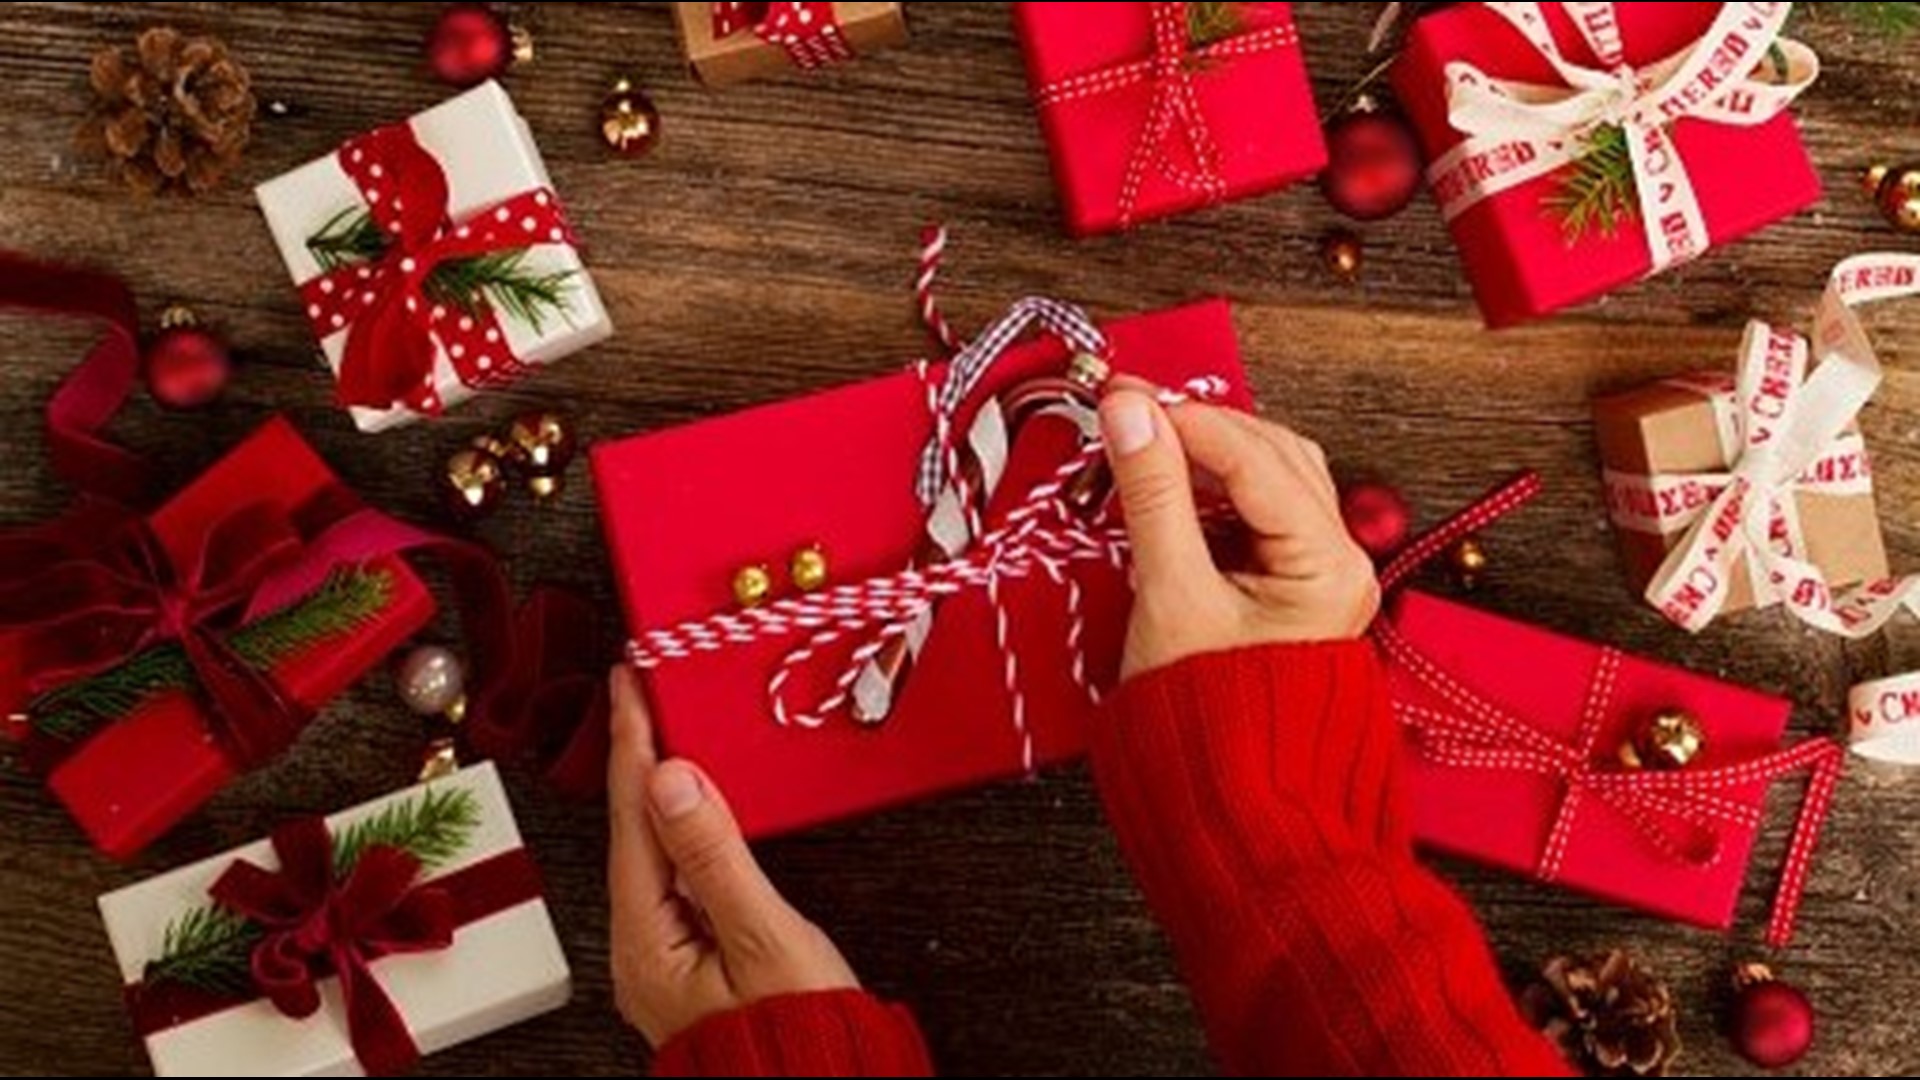 These are the year's top gift trends, according to Pinterest | wkyc.com